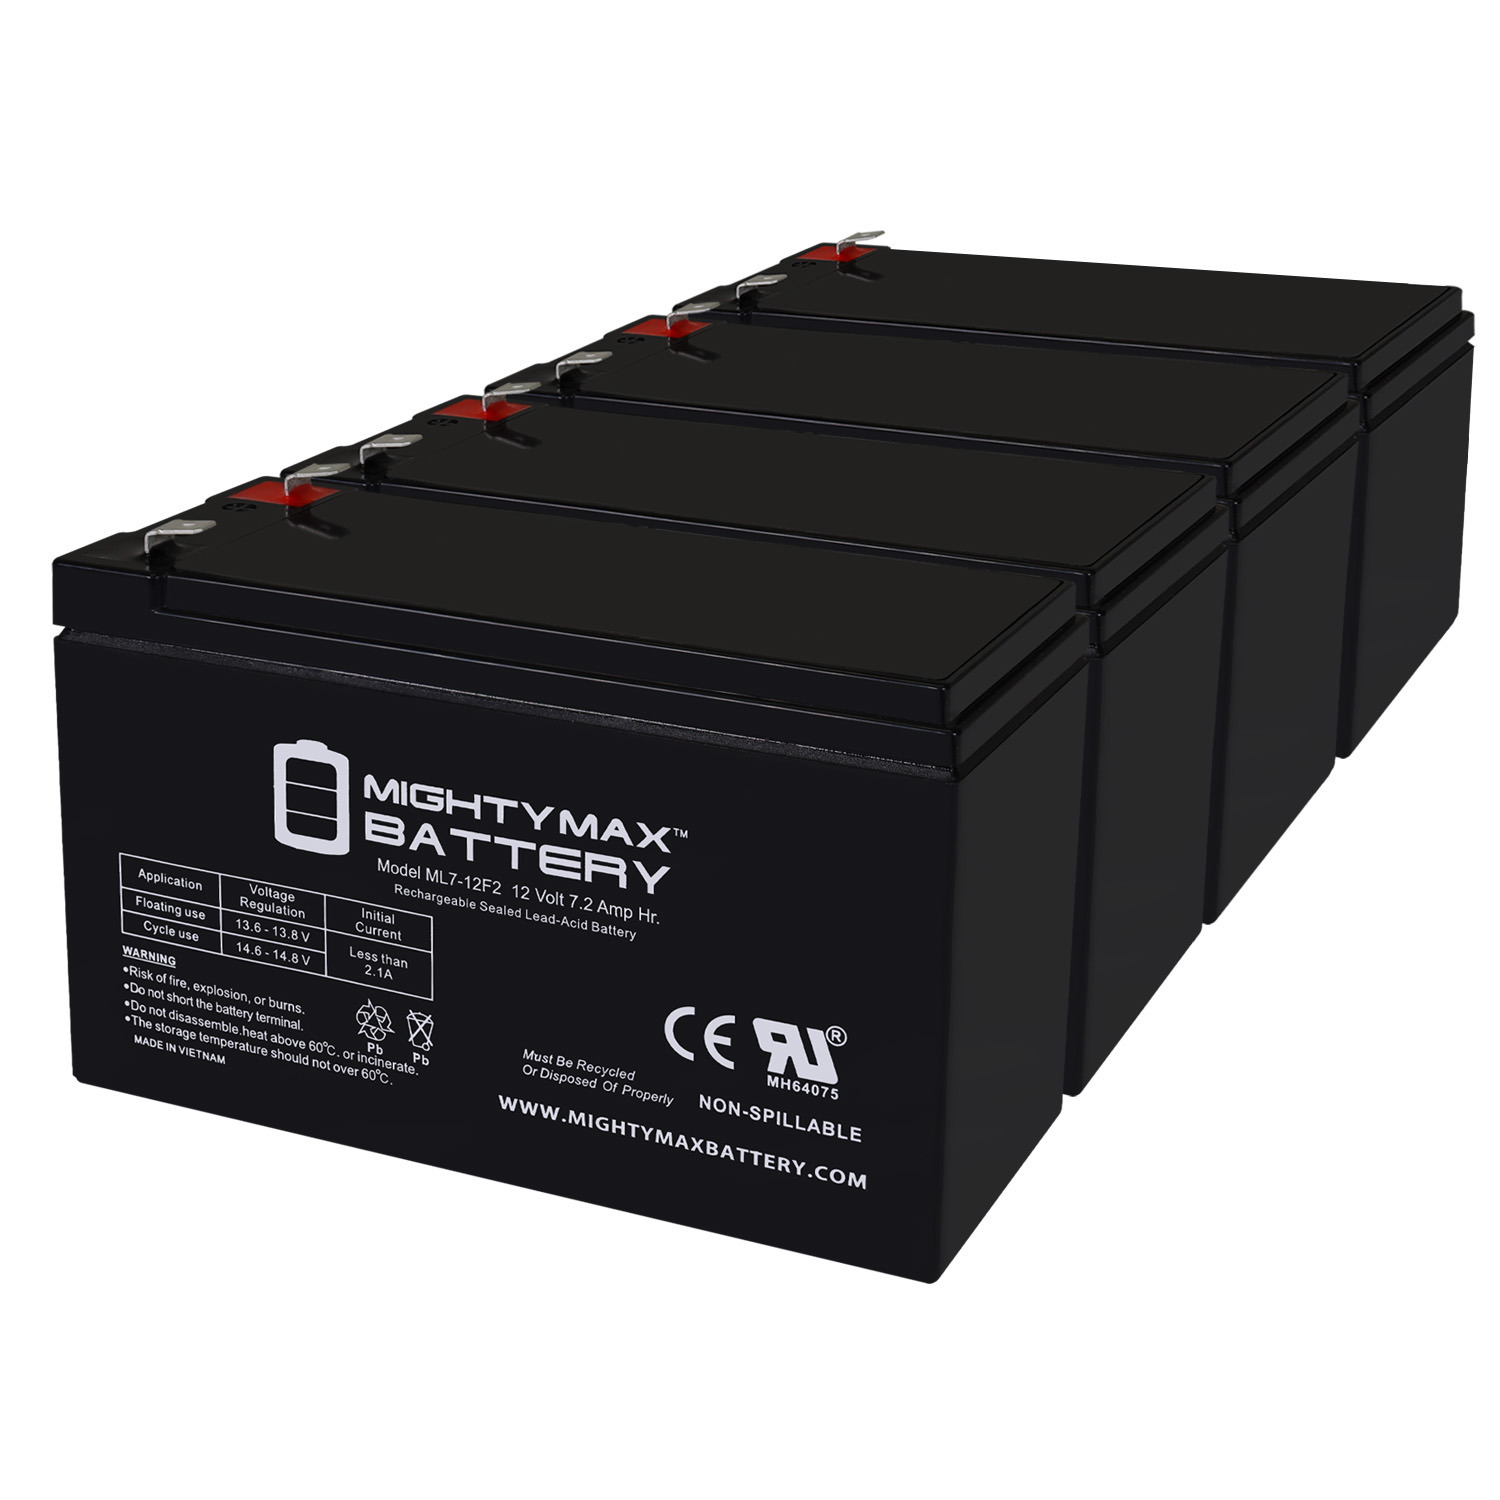 12V 7Ah F2 Replacement Battery for CyberPower 99 CPS650VA - 4 Pack